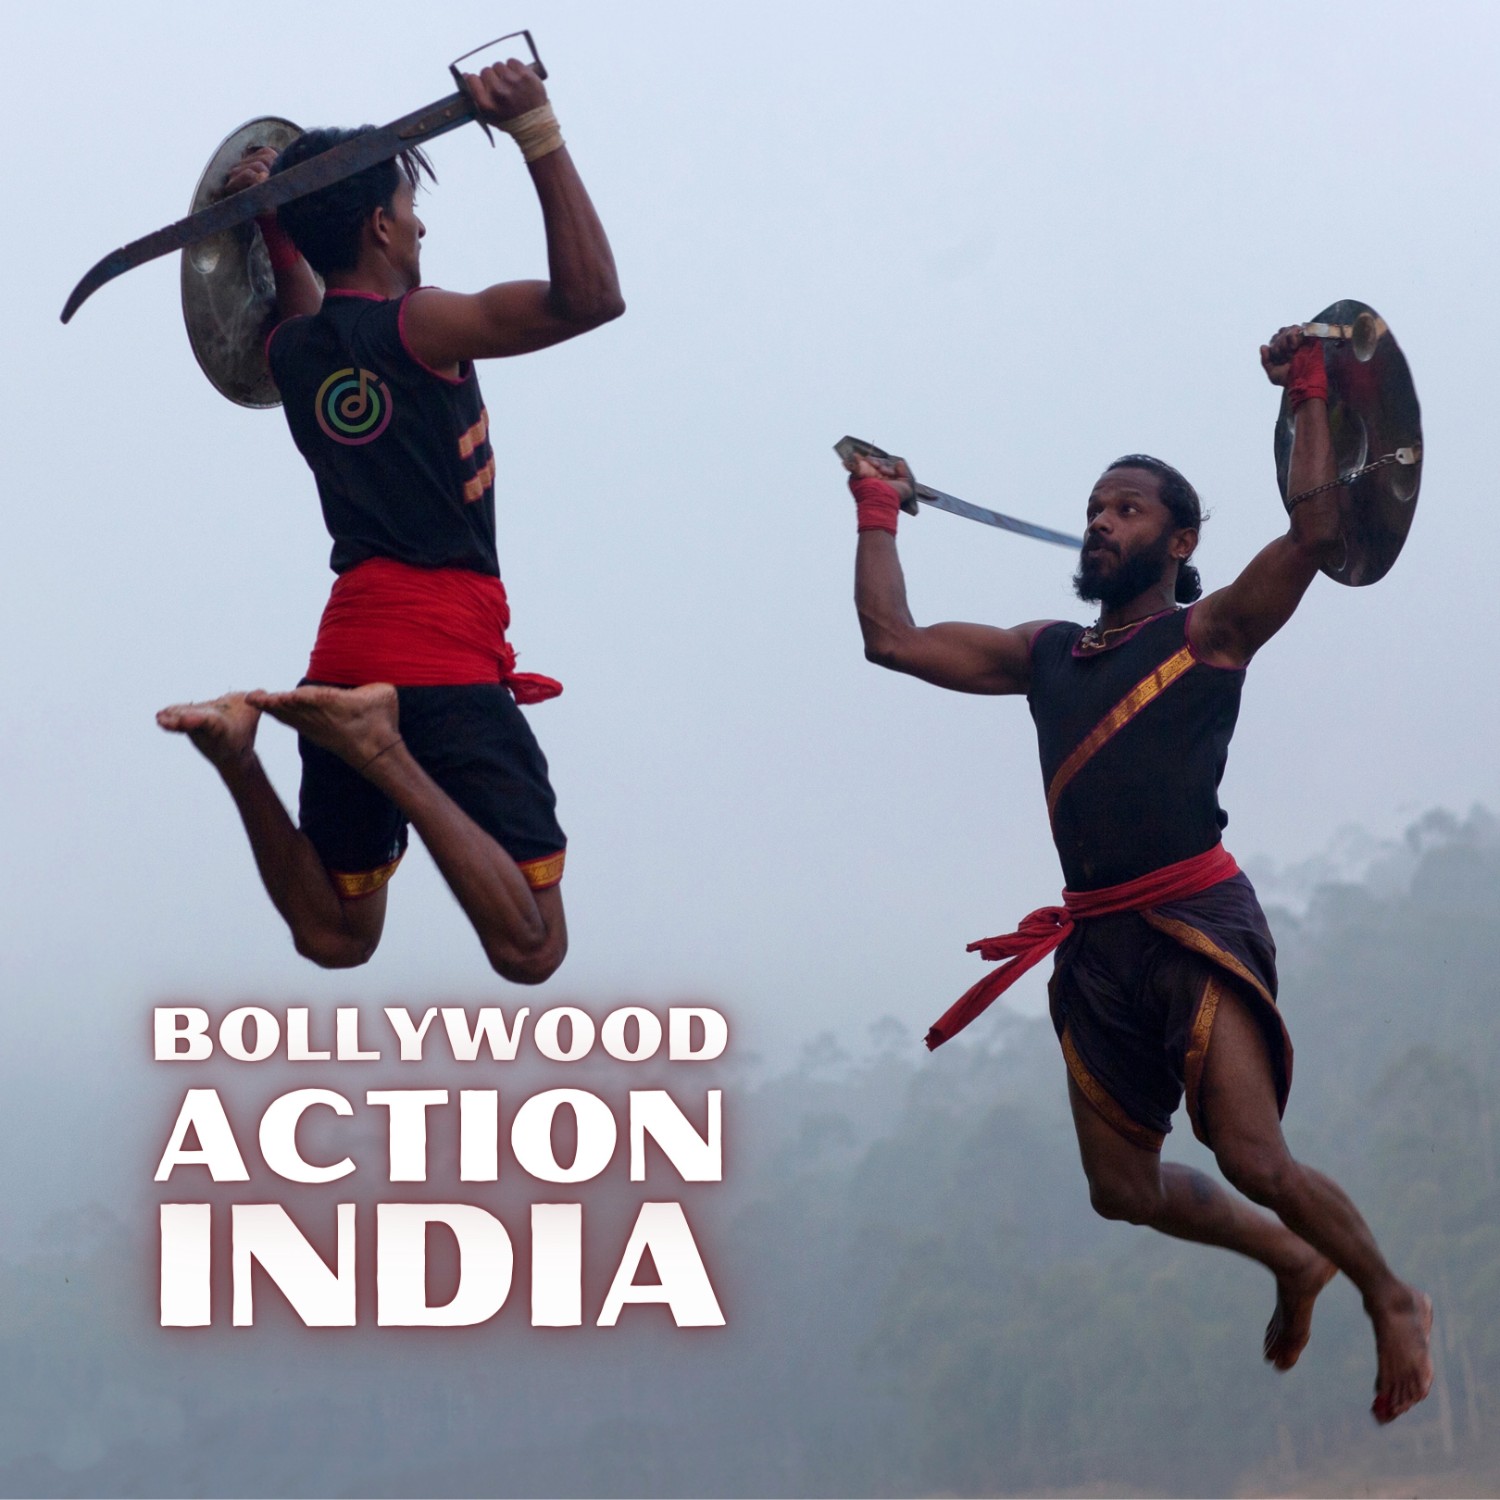 Bollywood Action India